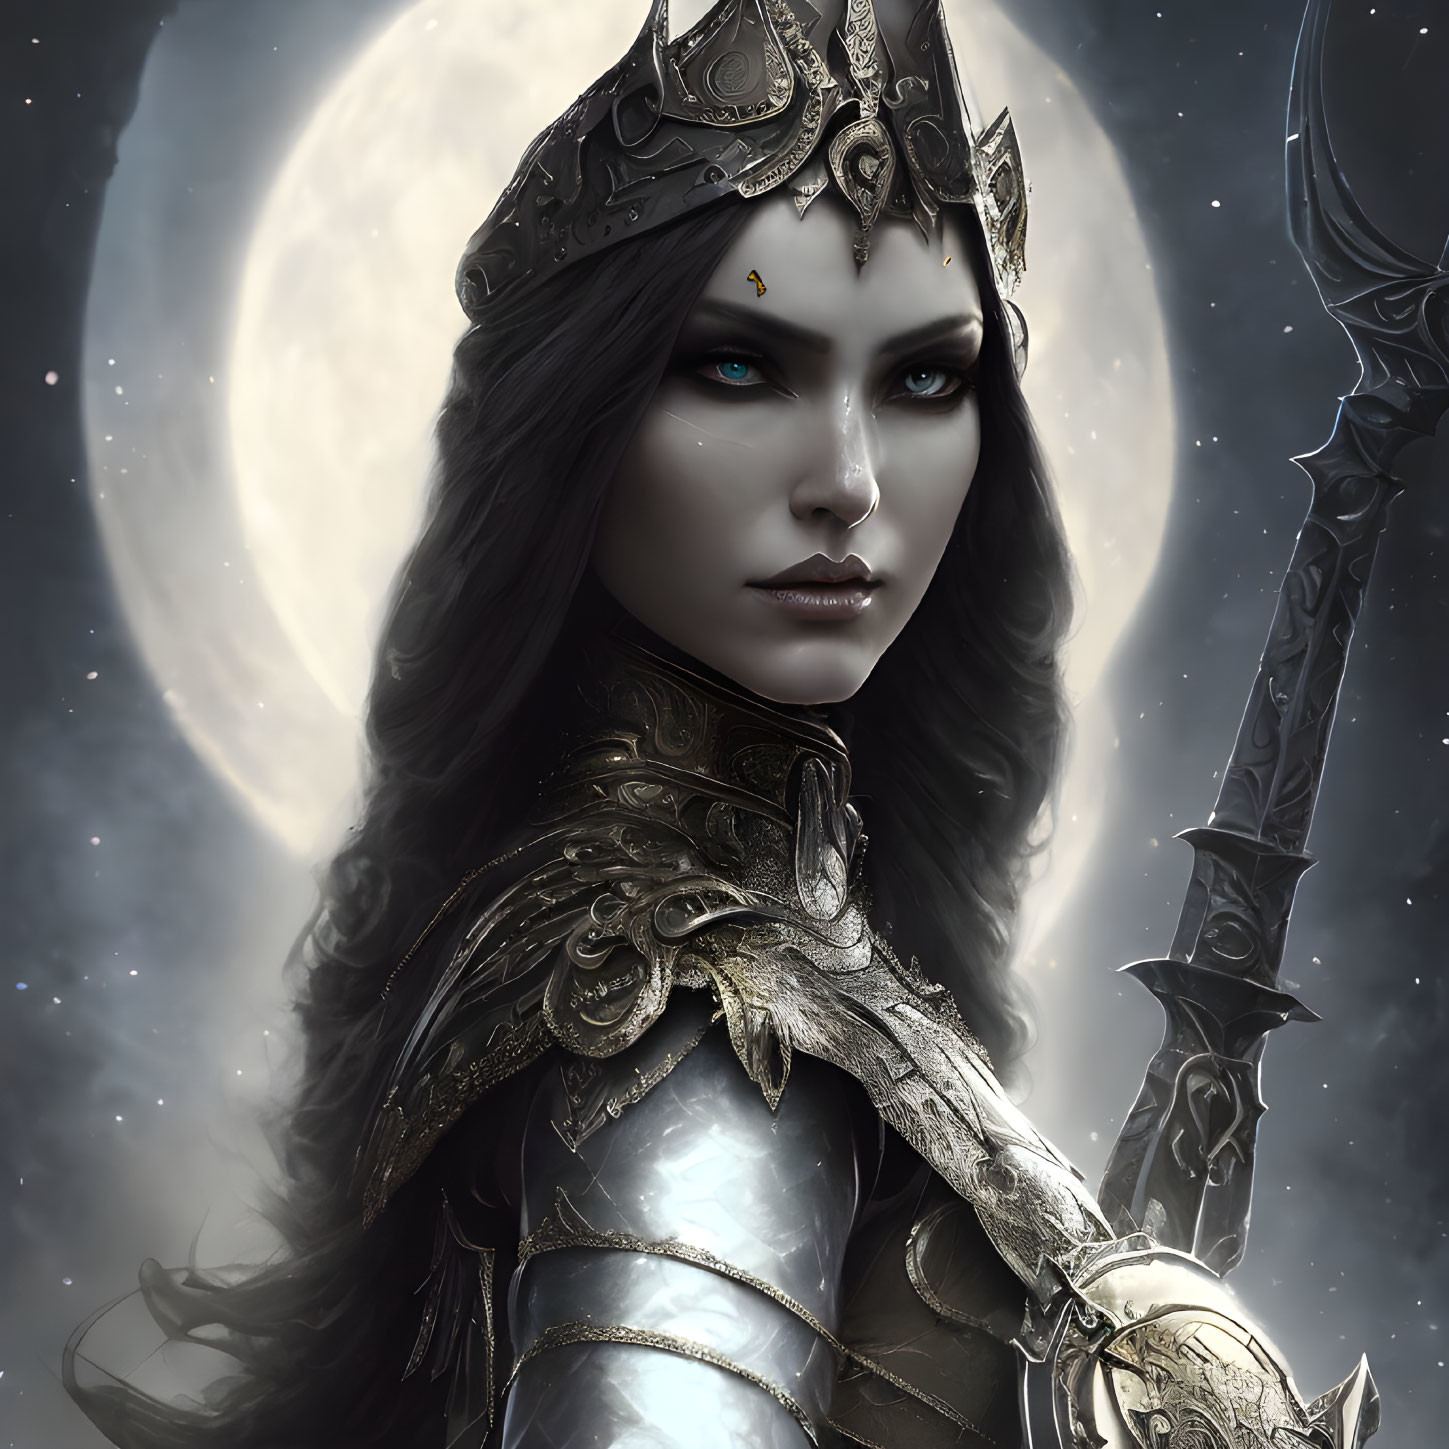 Female Warrior in Silver Armor with Crown and Blue Eyes Under Full Moon